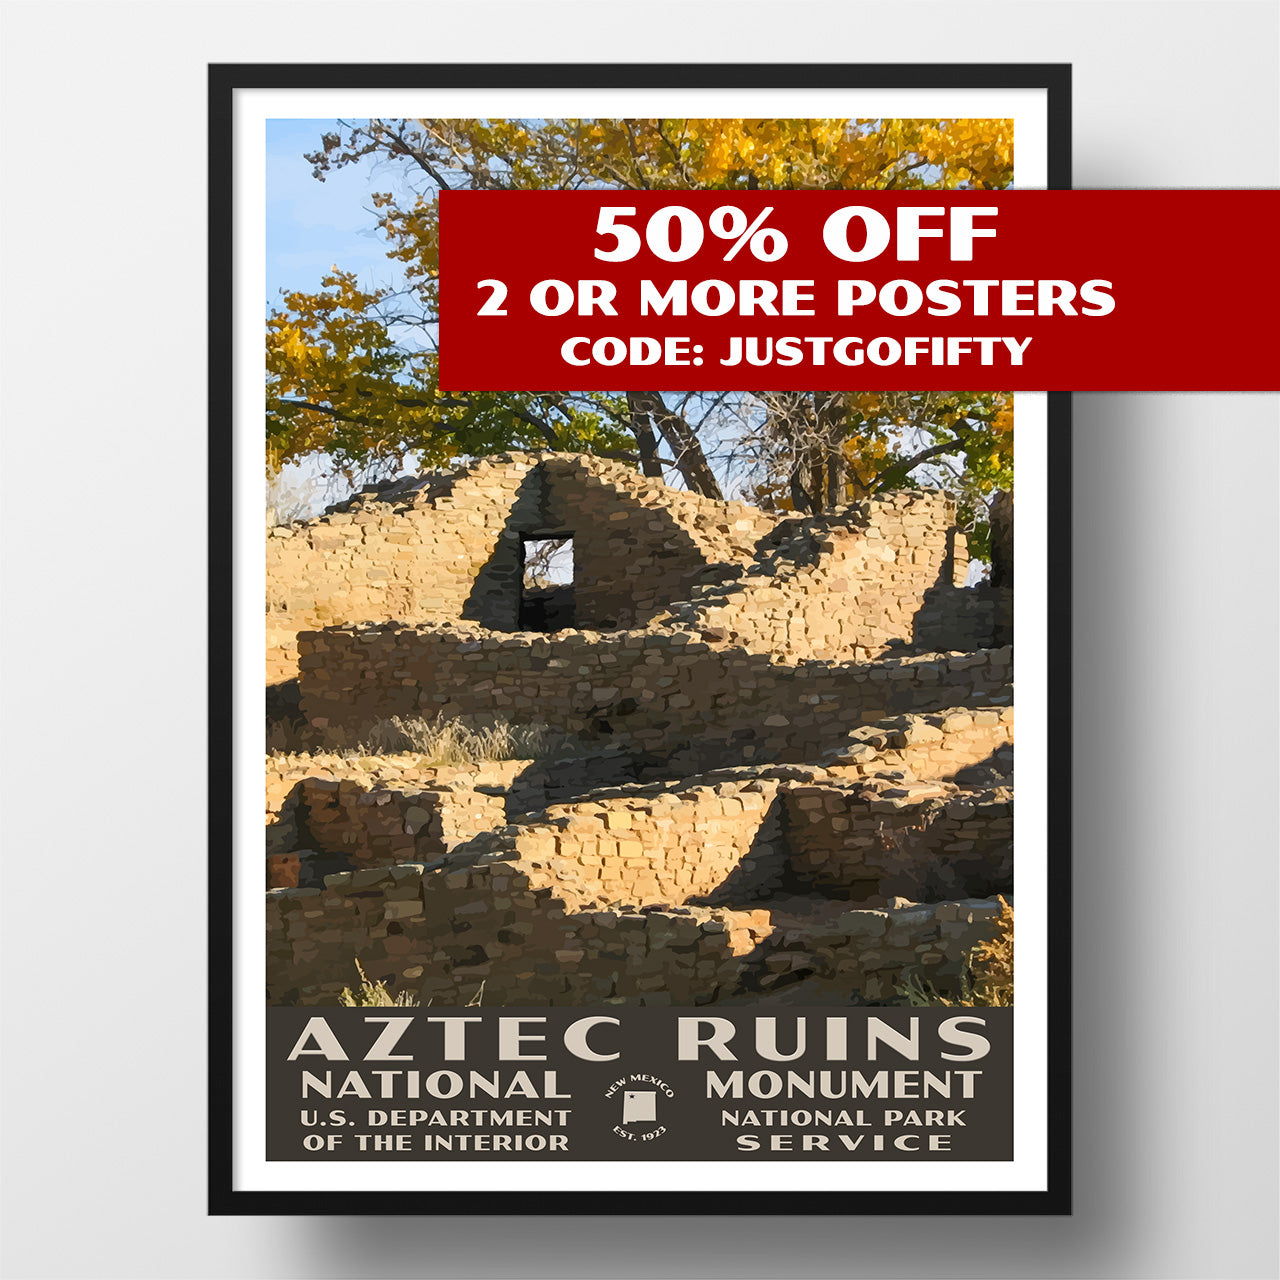 Aztec Ruins National Monument poster